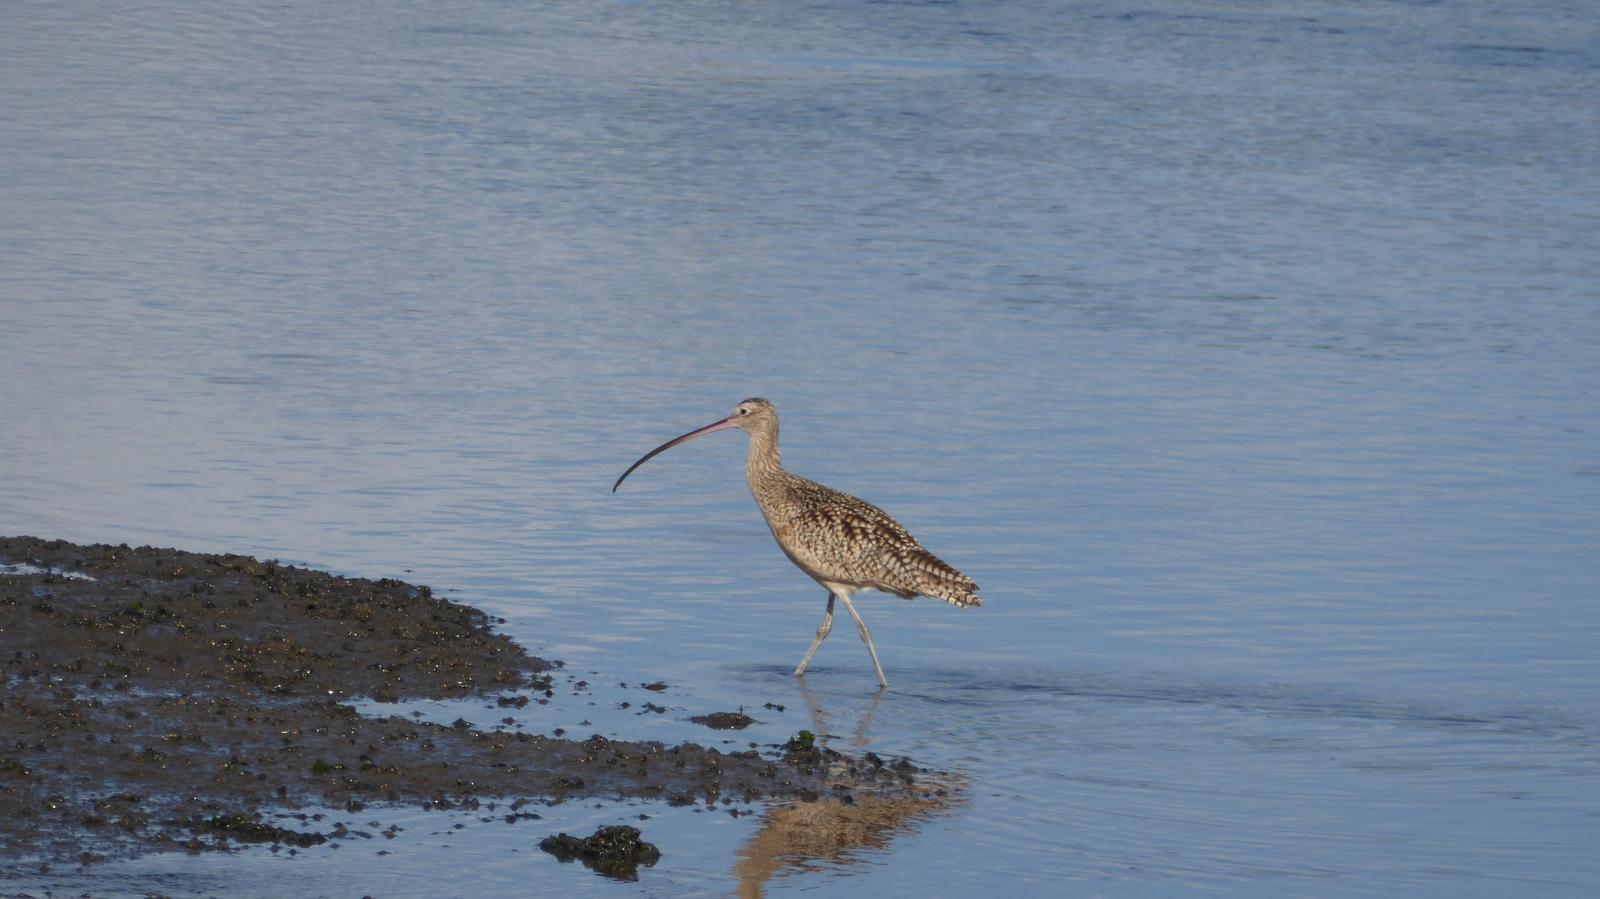 Long-billed Curlew Photo by Daliel Leite